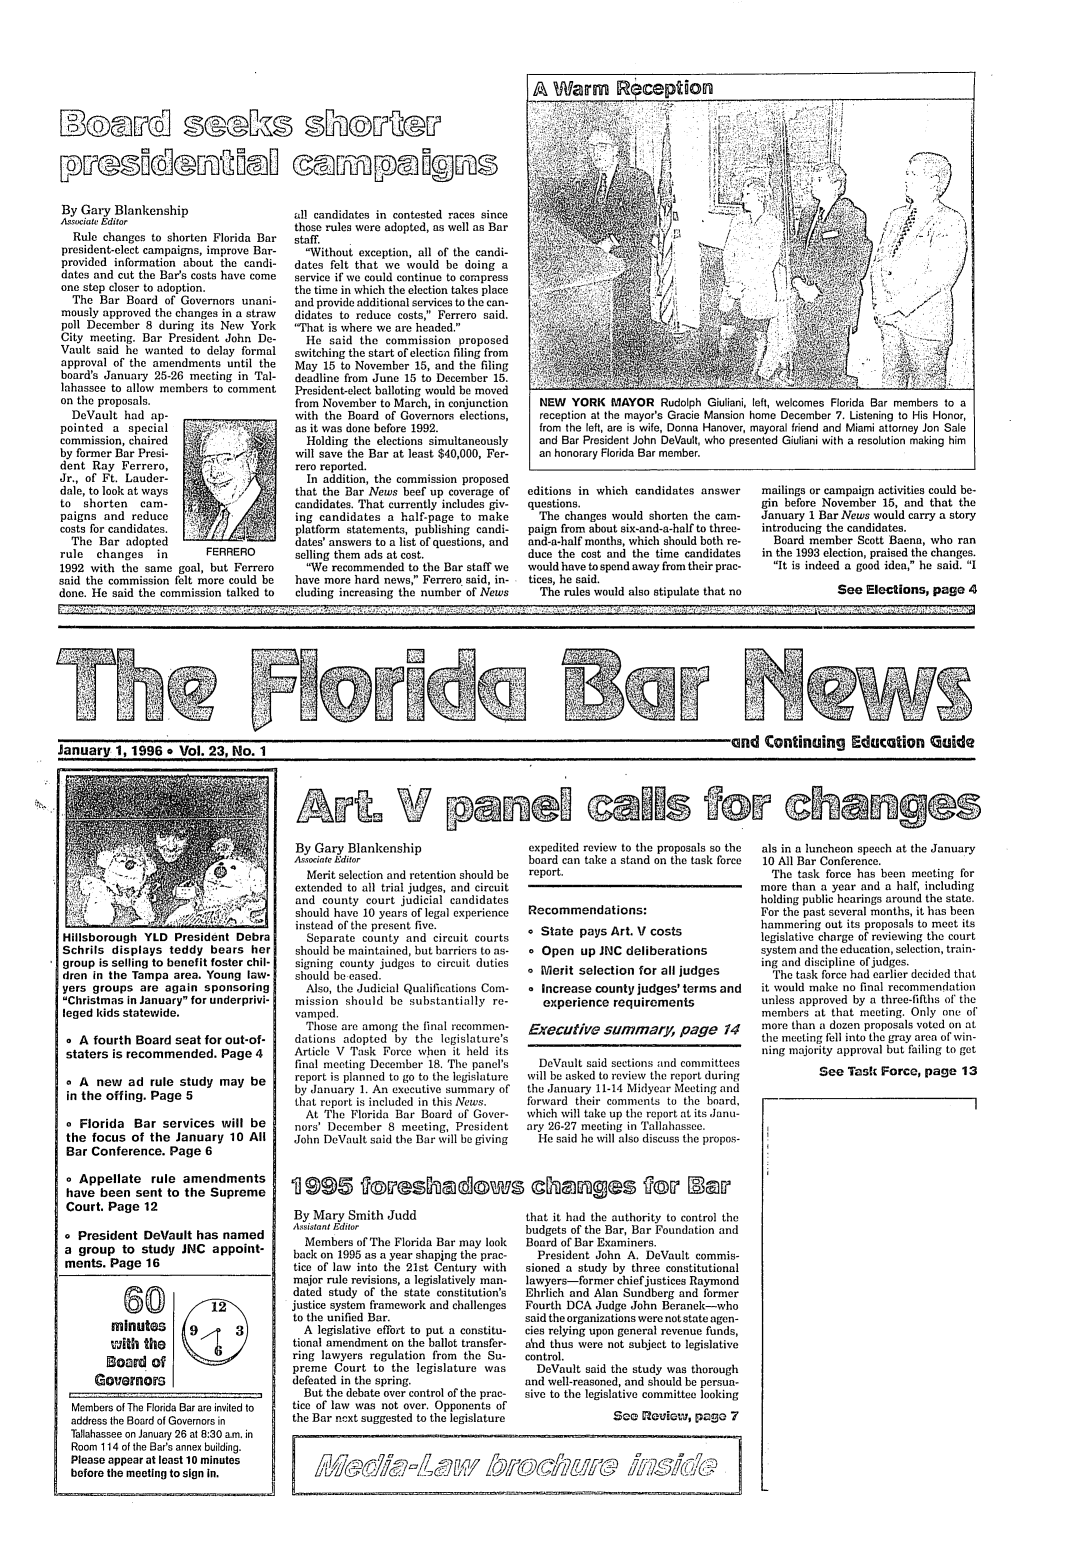 handle is hein.barjournals/flabn0023 and id is 1 raw text is: 





A Warm R~eption


r ----N~


By Gary Blankenship
Aqsociat Editor
   Rule changes to shorten Florida Bar
president-elect campaigns, improve Bar-
provided information about the candi-
dates and cut the Bar's costs have come
one step closer to adoption.
  The Bar Board of Governors unani-
mously approved the changes in a straw
poll December 8 during its New York
City meeting. Bar President John De-
Vault said he wanted to delay formal
approval of the amendments until the
board's January 25-26 meeting in Tal-
lahassee to allow members to comment
on the proposals.
  DeVault had ap-
pointed a special
commission, chaired
by former Bar Presi-
dent Ray Ferrero,
Jr., of Ft. Lauder-
dale, to look at ways
to  shorten   cam-
paigns and reduce
costs for candidates.
  The Bar adopted
rule   changes   in       FERRERO
1992 with the same goal, but Ferrero
said the commission felt more could be
done. He said the commission talked to


all candidates in contested races since
those rules were adopted, as well as Bar
staff.
  Without exception, all of the candi-
dates felt that we would be doing a
service if we could continue to compress
the time in which the election takes place
and provide additional services to the can-
didates to reduce costs, Ferrero said.
'That is where we are headed.
  He said the commission proposed
switching the start of electiGn filing from
May 15 to November 15, and the filing
deadline from June 15 to December 15.
President-elect balloting would be moved
from November to March, in conjunction
with the Board of Governors elections,
as it was done before 1992.
  Holding the elections simultaneously
will save the Bar at least $40,000, Fer-
rero reported.
  In addition, the commission proposed
that the Bar News beef up coverage of
candidates. That currently includes giv-
ing candidates a half-page to make
platform statements, publishing candi-
dates' answers to a list of questions, and
selling them ads at cost.
  We recommended to the Bar staff we
have more hard news, Ferrero. said, in-
cluding increasing the number of News


NEW   YORK MAYOR Rudolph Giuliani, left, welcomes Florida Bar members to a
reception at the mayor's Gracie Mansion home December 7. Listening to His Honor,
from the left, are is wife, Donna Hanover, mayoral friend and Miami attorney Jon Sale
and Bar President John DeVault, who presented Giuliani with a resolution making him
an honorary Florida Bar member.


editions in which candidates answer
questions.
  The changes would shorten the cam-
paign from about six-and-a-half to three-
and-a-half months, which should both re-
duce the cost and the time candidates
would have to spend away from their prac-
tices, he said.
  The rules would also stipulate that no


mailings or campaign activities could be-
gin before November 15, and that the
January 1 Bar News would carry a story
introducing the candidates.
  Board member Scott Baena, who ran
in the 1993 election, praised the changes.
  It is indeed a good idea, he said. I

             See Elections, page 4


January 1, 1996o Vol. 23, No. 1                                                                                         ..n. Continuing Education Guide


Hillsborough YLD President Debra
Schrils displays teddy bears her
group is selling to benefit foster chil-
dren in the Tampa area. Young law-
yers groups are again sponsoring
Christmas in January for underprivi-
leged kids statewide.

o A fourth Board seat for out-of-
staters is recommended. Page 4

o A new ad rule study may be
in the offing. Page 5

o Florida Bar services will be
the focus of the January 10 All
Bar Conference. Page 6

o Appellate rule amendments
have been sent to the Supreme
Court. Page 12

o President DeVault has named
a group to study JNC appoint-
ments. Page 16


             (a           12
         minutes      9       3
         Ujith the
         Eoavmd of
     tGovernorWS

  Members of The Florida Bar are invited to
  address the Board of Governors in
  Tallahassee on January 26 at 8:30 a.m. in
  Room 114 of the Bar's annex building.
  Please appear at least 10 minutes
  before the meeting to sign in.


By Gary Blankenship
Associate Editor
  Merit selection and retention should be
extended to all trial judges, and circuit
and county court judicial candidates
should have 10 years of legal experience
instead of the present five.
  Separate county and circuit courts
should be maintained, but barriers to as-
signing county judges to circuit duties
should be eased.
  Also, the Judicial Qualifications Com-
mission should be substantially re-
vamped.
  Those are among the final recommen-
dations adopted by the legislature's
Article V Task Force w hen it held its
final meeting December 18. The panel's
report is planned to go to the legislature
by January 1. An executive summary of
that report is included in this News.
  At The Florida Bar Board of Gover-
nors' December 8 meeting, President
John DeVault said the Bar will be giving


By Mary Smith Judd
Assistant Editor
  Members of The Florida Bar may look
back on 1995 as a year shaping the prac-
tice of law into the 21st Century with
major rule revisions, a legislatively man-
dated study of the state constitution's
justice system framework and challenges
to the unified Bar.
  A legislative effort to put a constitu-
tional amendment on the ballot transfer-
ring lawyers regulation from the Su-
preme Court to the legislature was
defeated in the spring.
  But the debate over control of the prac-
tice of law was not over. Opponents of
the Bar ncxt suggested to the legislature


expedited review to the proposals so the
board can take a stand on the task force
report.


Recommendations:
o State pays Art. V costs
o Open up JNC deliberations
o Merit selection for all judges
o Increase county judges' terms and
   experience requirements

Executive summary, page 14

  DeVault said sections and committees
will be asked to review the report during
the January 11-14 Midyear Meeting and
forward their comments to the board,
which vill take up the report at its Janu-
ary 26-27 meeting in Tallahassee.
  He said he will also discuss the propos-


that it had the authority to control the
budgets of the Bar, Bar Foundation and
Board of Bar Examiners.
  President John A. DeVault commis-
sioned a study by three constitutional
lawyers-former chief justices Raymond
Ehrlich and Alan Sundberg and former
Fourth DCA Judge John Beranek-who
said the organizations were not state agen-
cies relying upon general revenue funds,
a'nd thus were not subject to legislative
control.
  DeVault said the study was thorough
and well-reasoned, and should be persua-
sive to the legislative committee looking
               See o euiowi, pago 7


1174~L~Y~lfQj L[~  /~~J


als in a luncheon speech at the January
10 All Bar Conference.
  The task force has been meeting for
more than a year and a half, including
holding public hearings around the state.
For the past several months, it has been
hammering out its proposals to meet its
legislative charge of reviewing the court
system and the education, selection, train-
ing and discipline of judges.
  The task force had earlier decided that
it would make no final recommendation
unless approved by a three-fifths of' the
members at that meeting. Only one of
more than a dozen proposals voted on at
the meeting fell into the gray area of win-
ning majority approval but failing to get

          See Task Force, page 13


AT2. V po rln9 (MONS fOff, changes


995 goveshadows changes gov Serf


